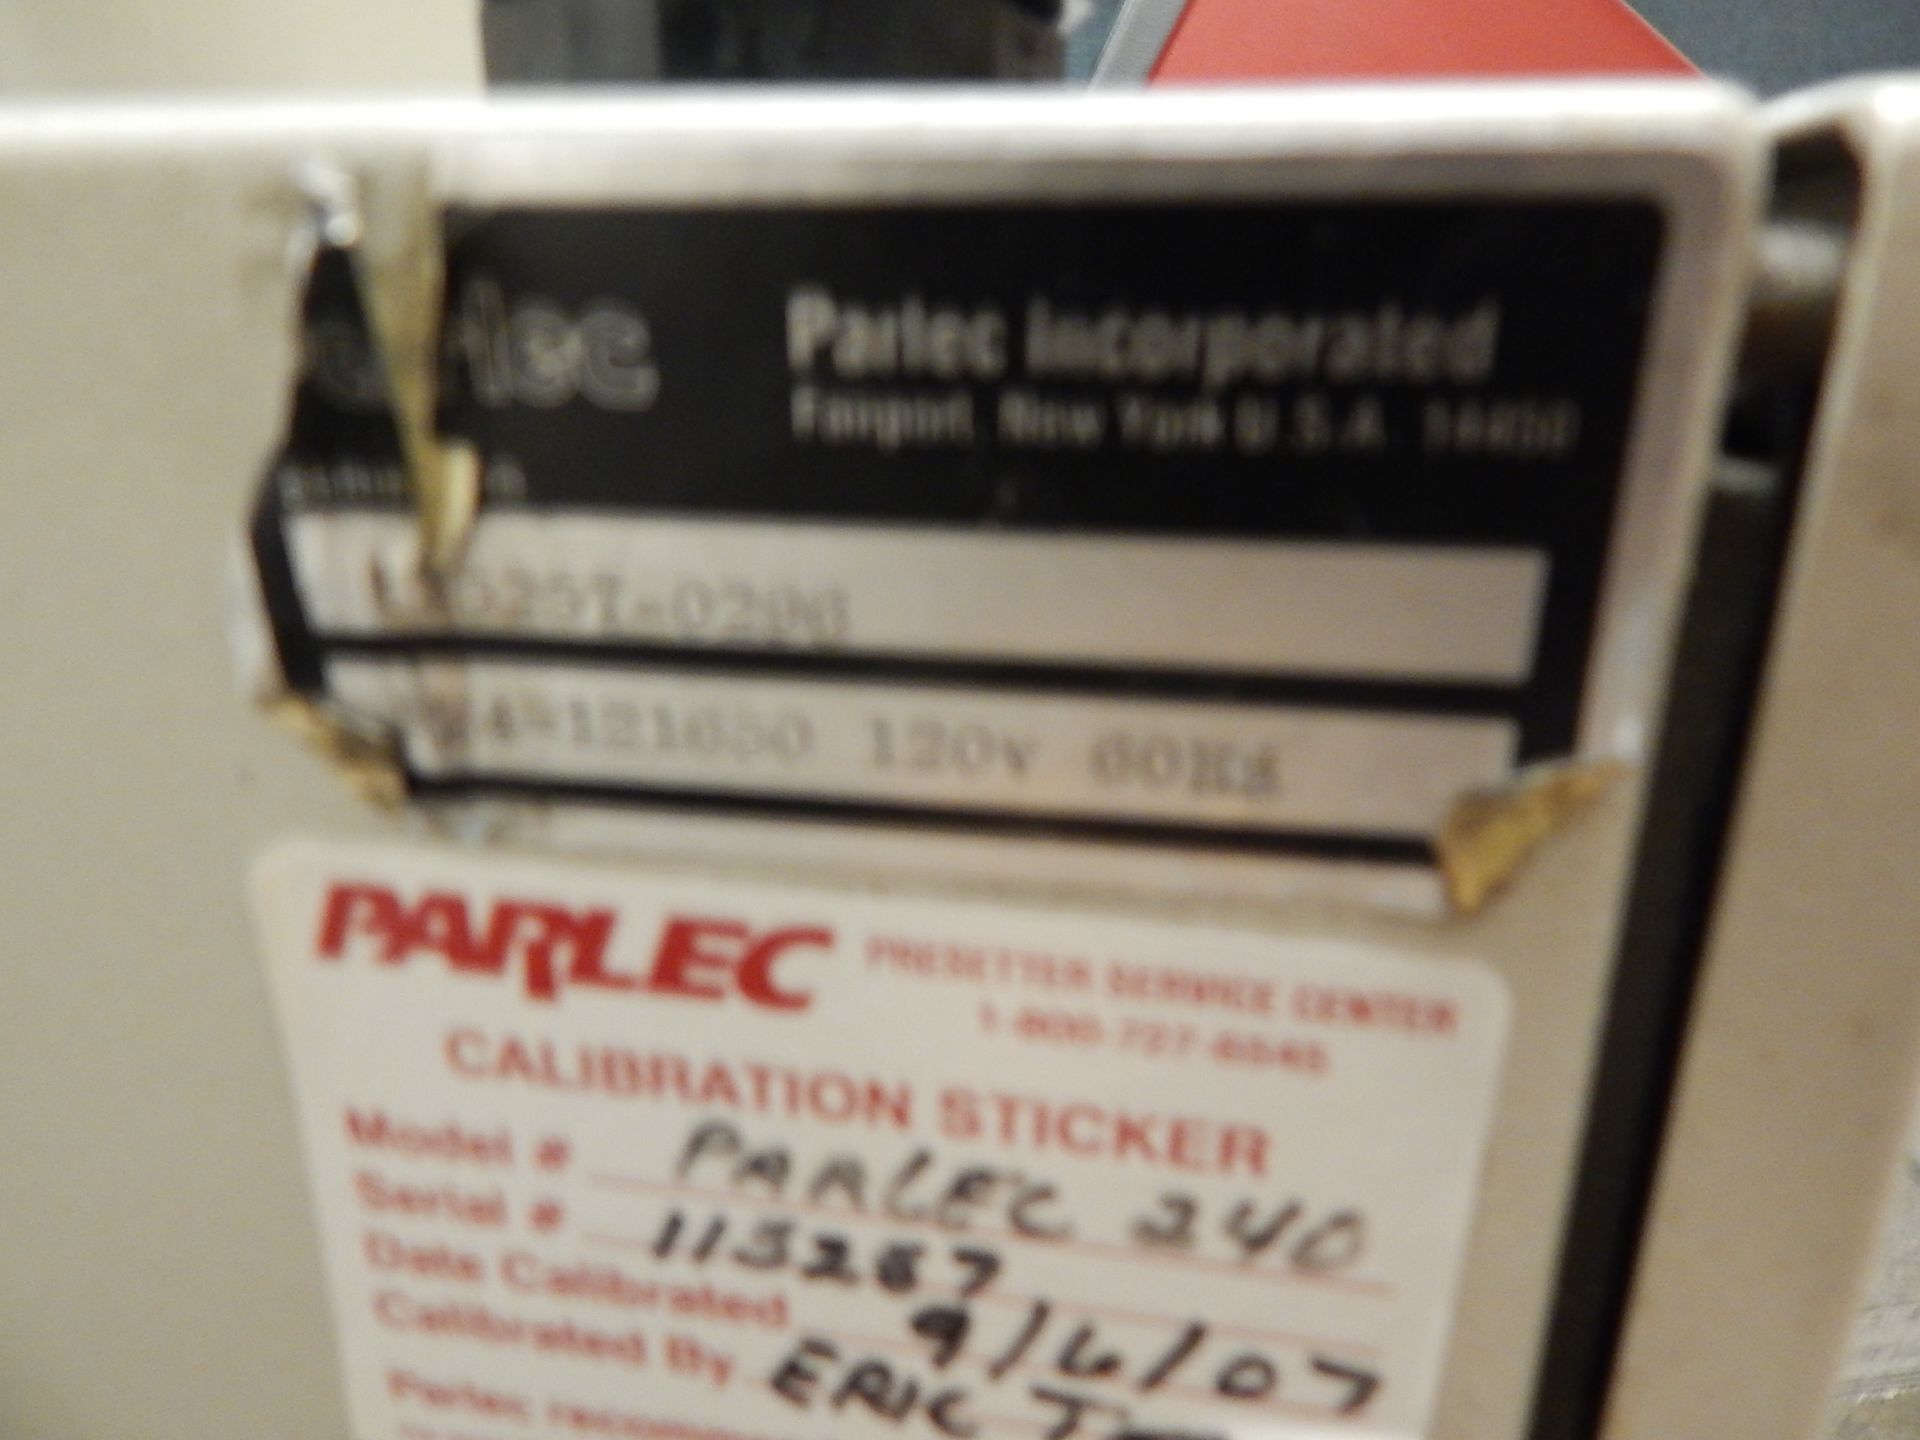 Parlec Model 240 Tool Setter, s/n 115257-0296, with Parlec Parset Master Control - Image 5 of 5